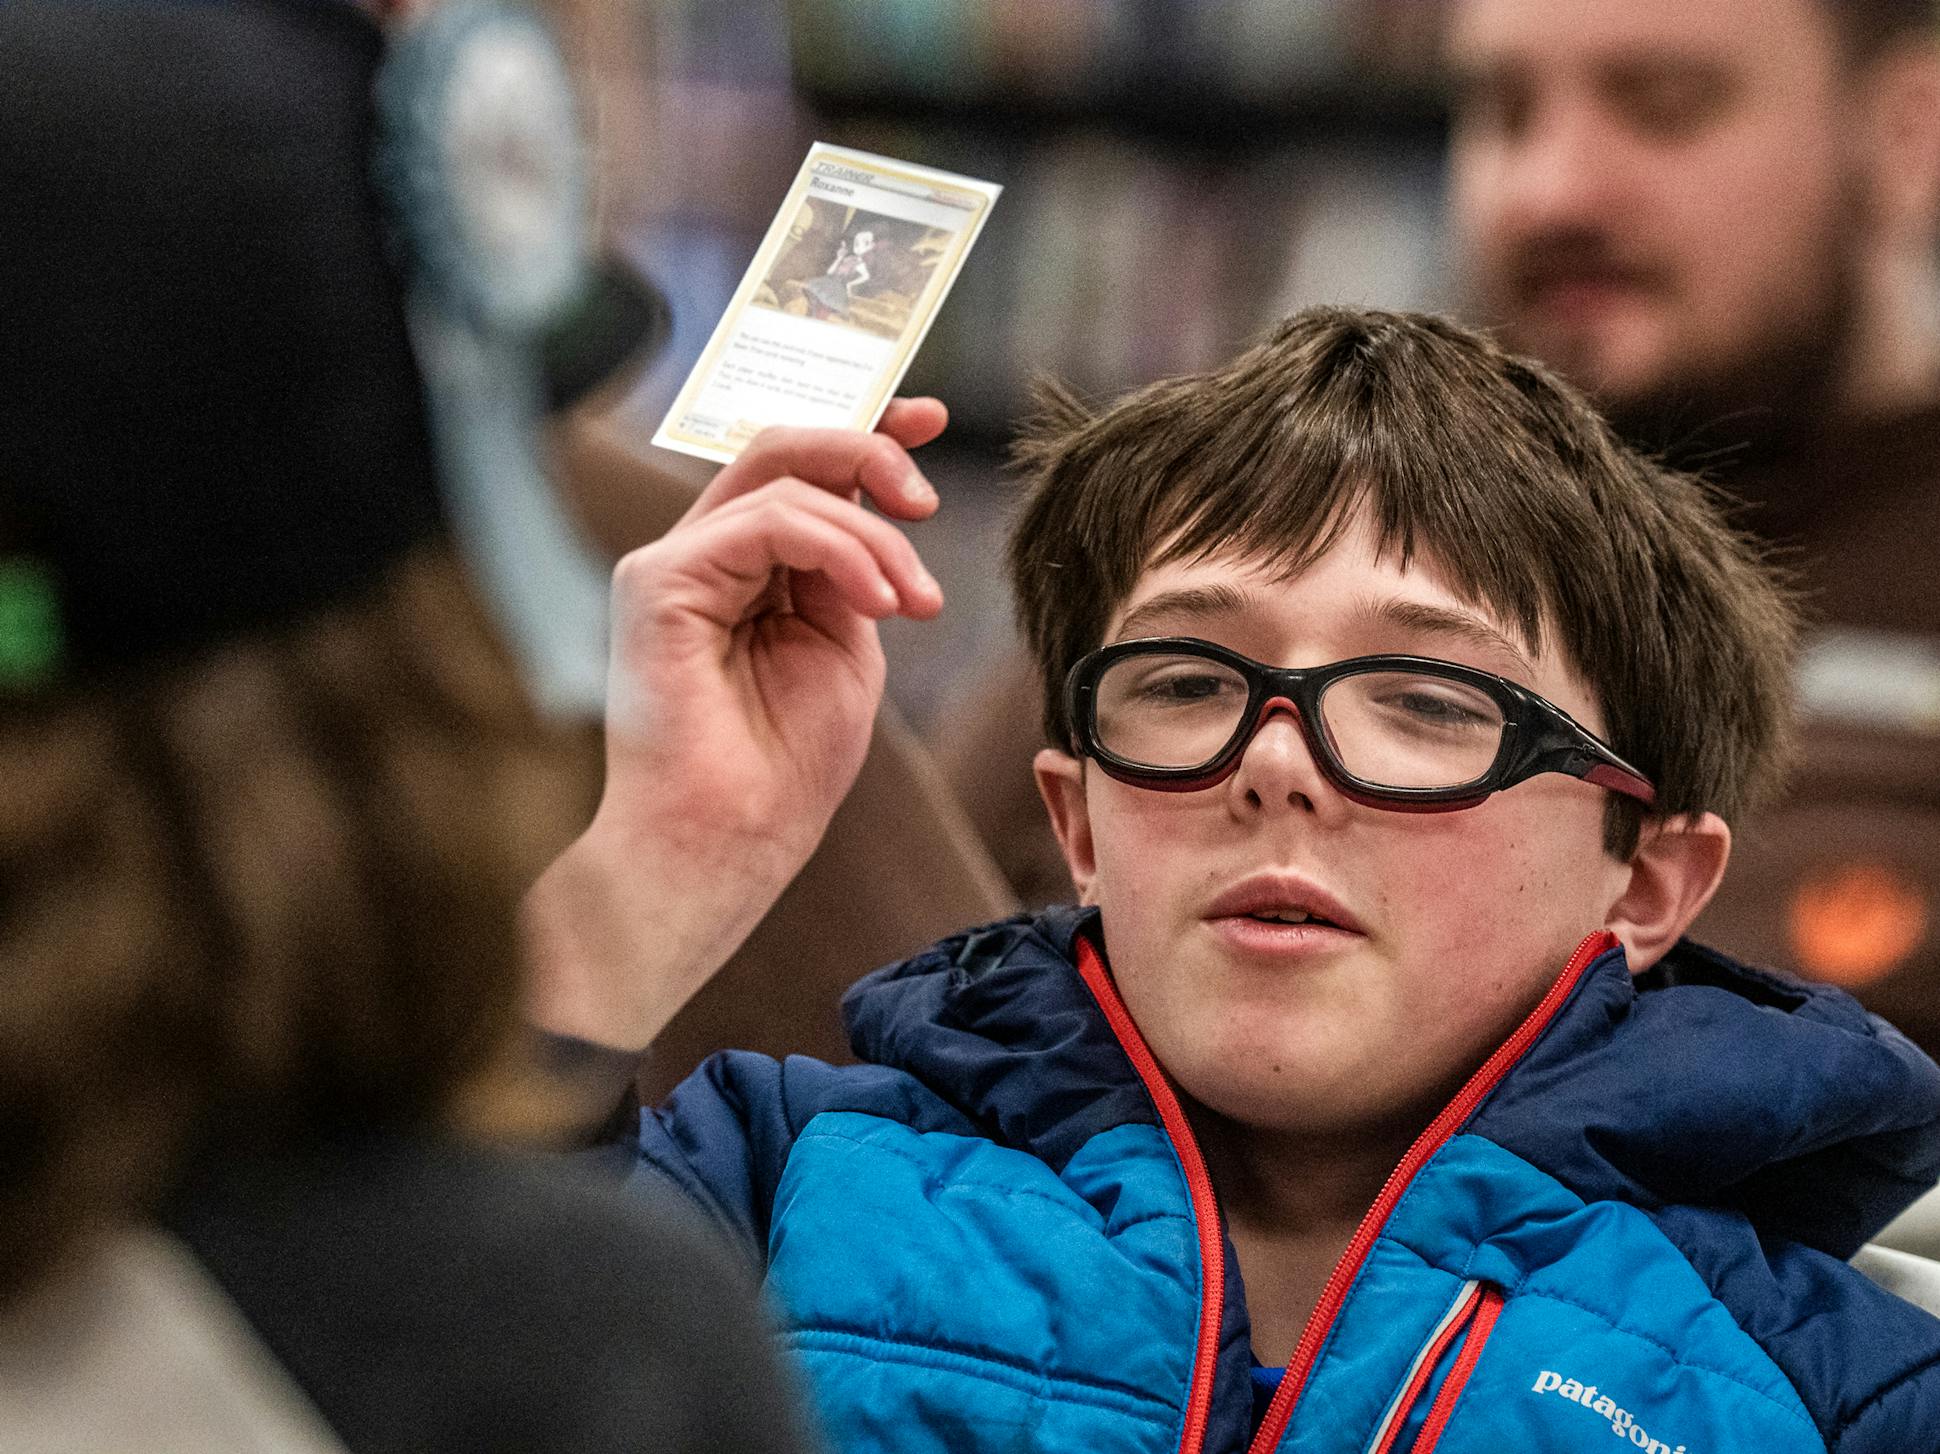 At a game store in South St. Paul, Harrison showed one of his cards at a Pokémon gathering. His experience demonstrates the bind families are in when they seek mental health services.